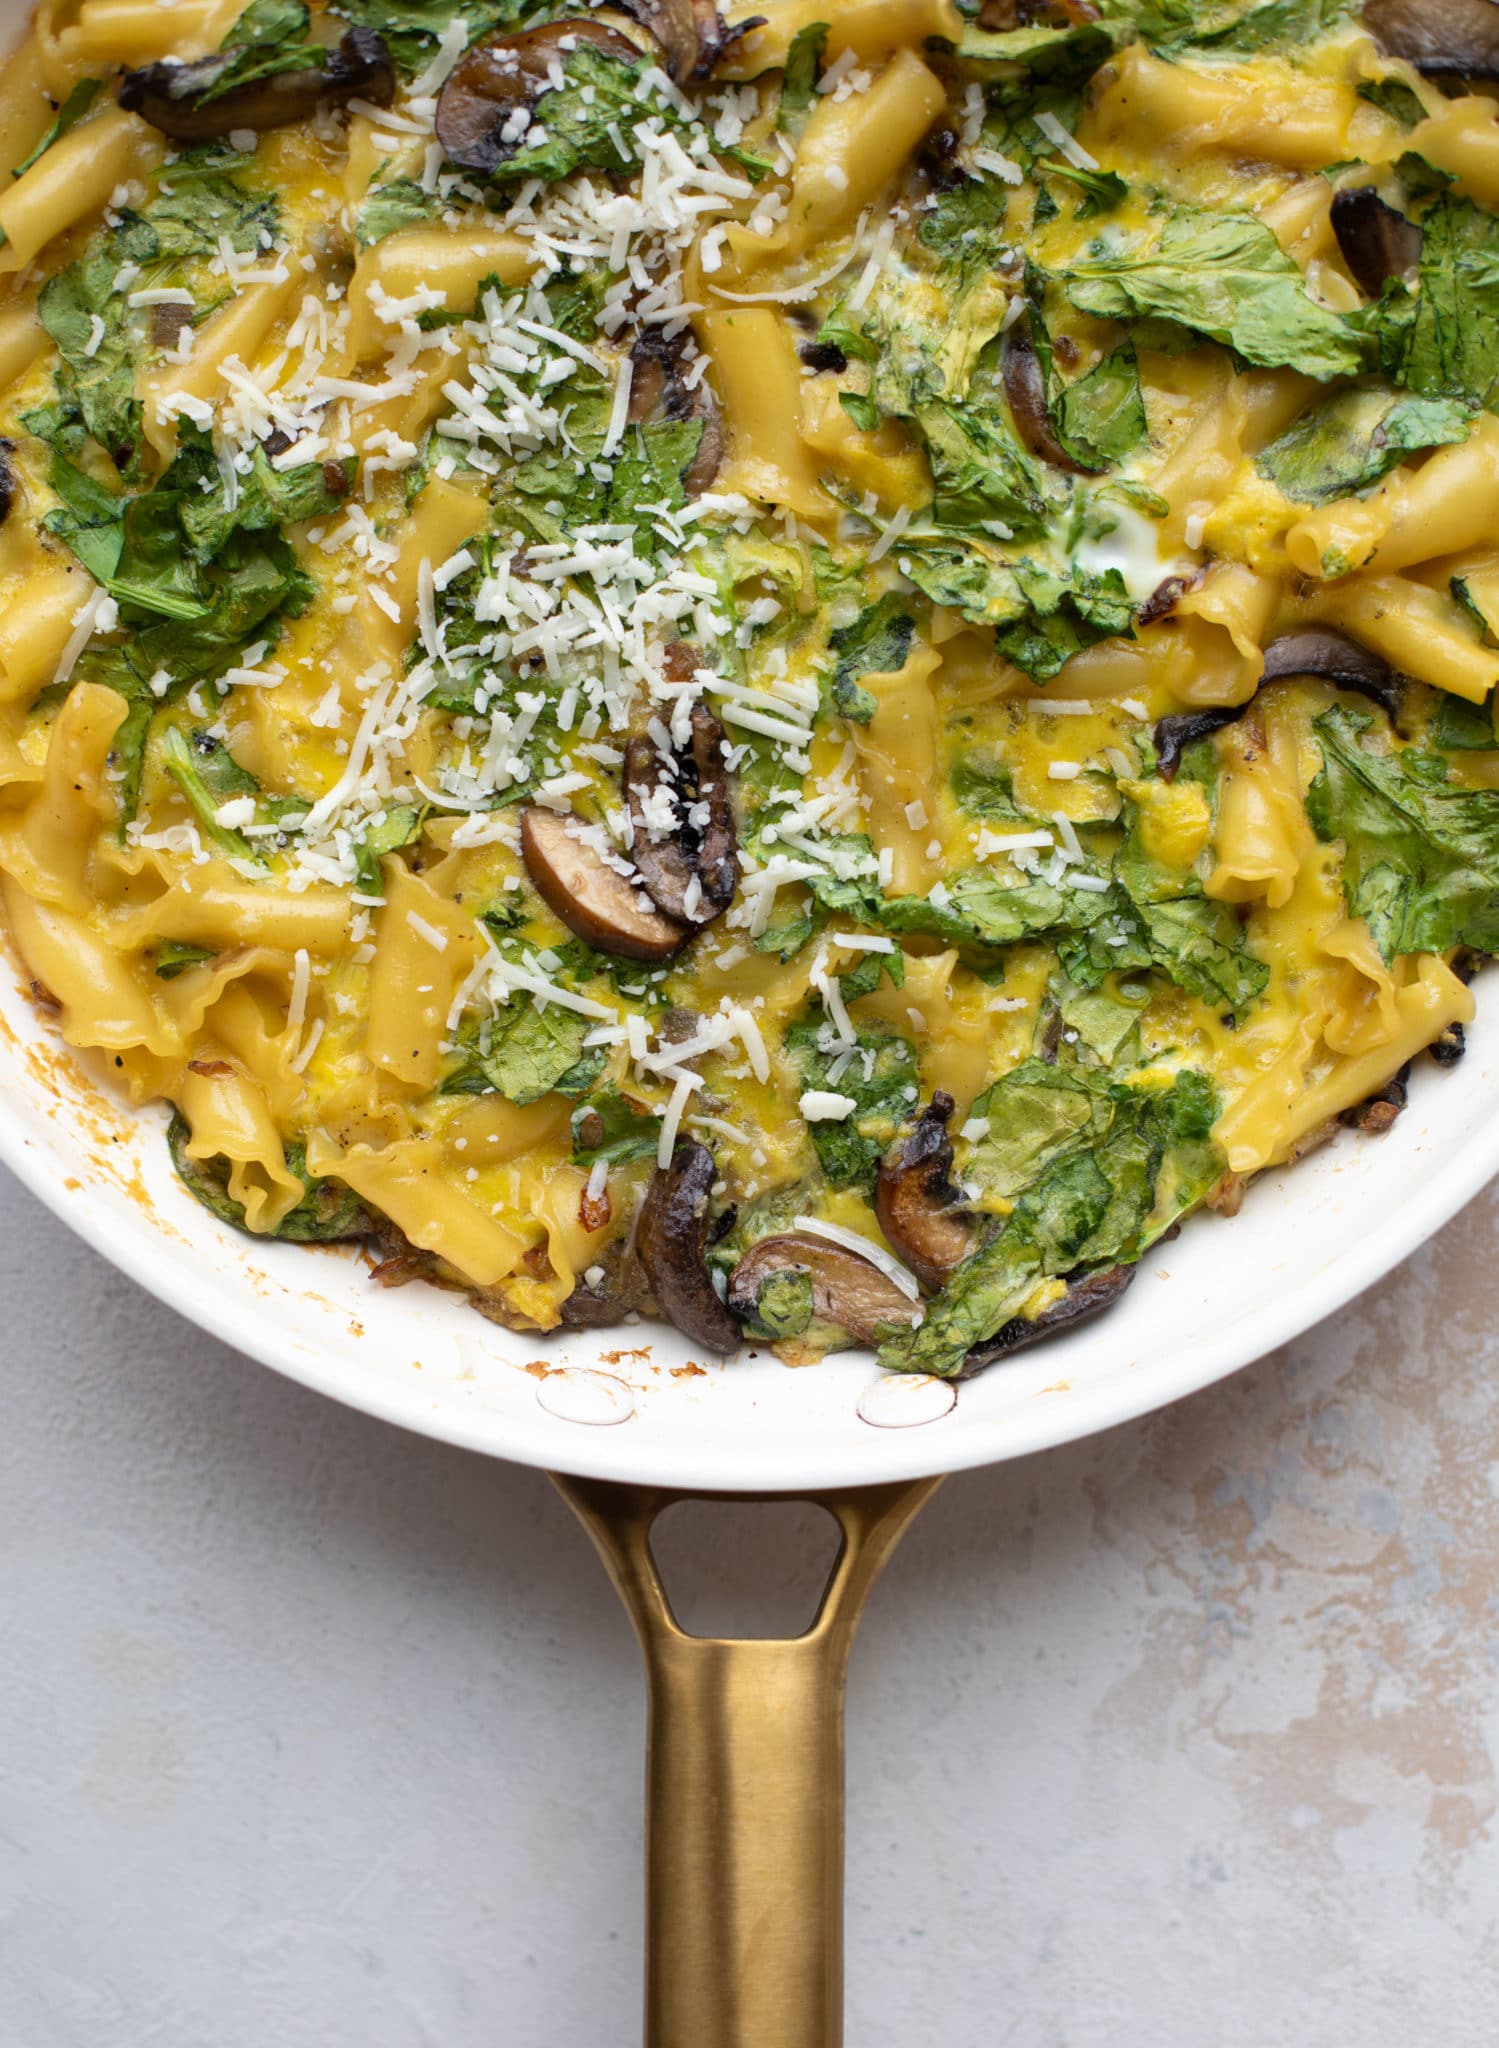 Pasta Frittata - Easy Pasta Frittata with Spring Greens